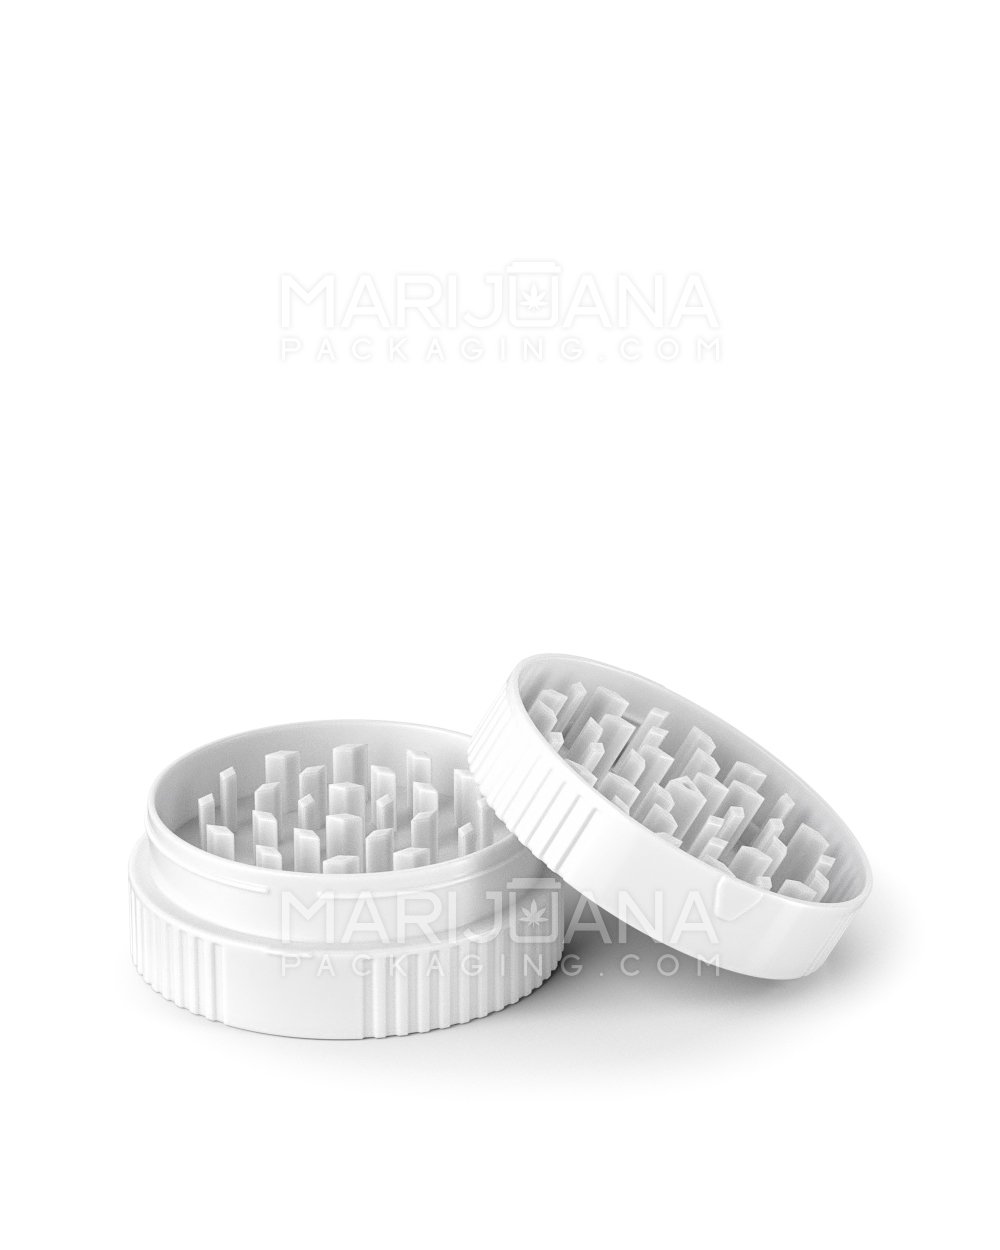 Child Resistant | Push & Turn Vial with Grinder Cap | 40dr - White Plastic - 150 Count - 6